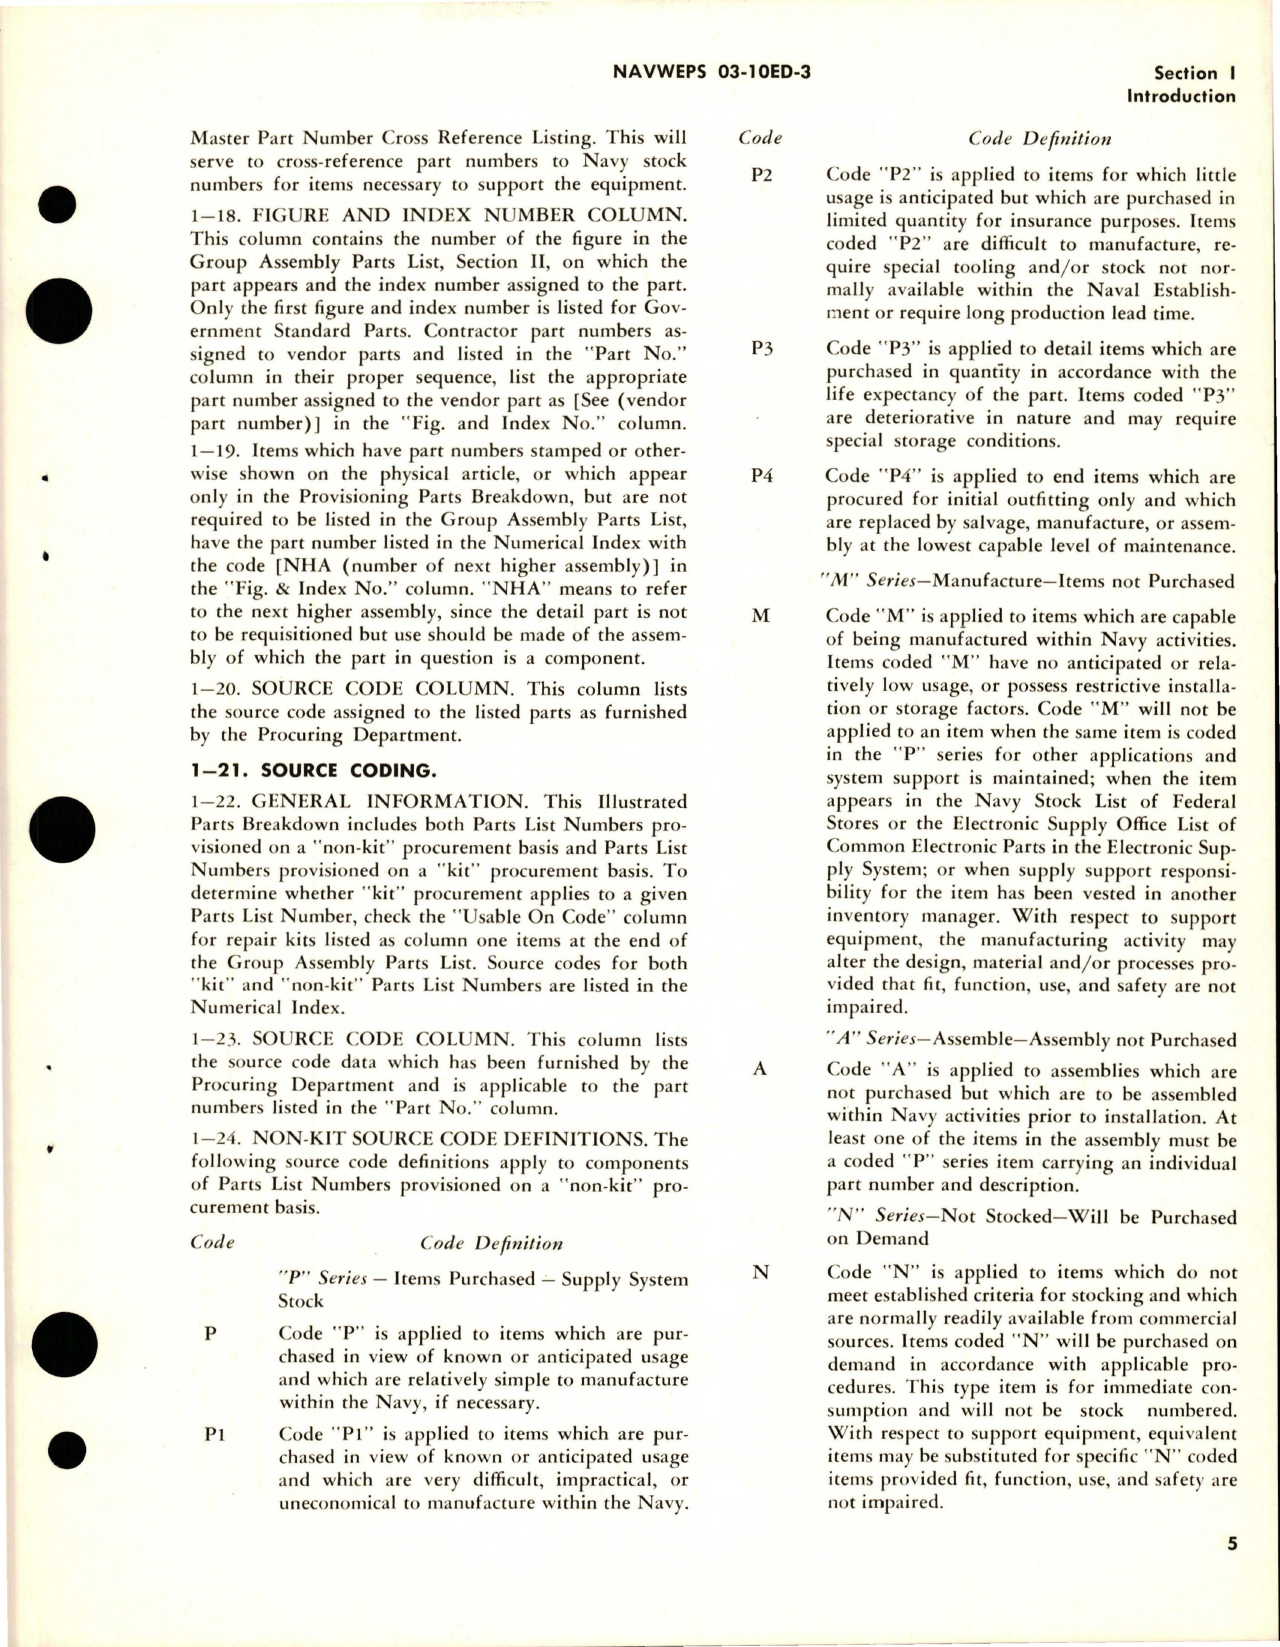 Sample page 7 from AirCorps Library document: Illustrated Parts Breakdown for Fuel and Water Pumps - Types F-10, H-2, H-4 and H-7